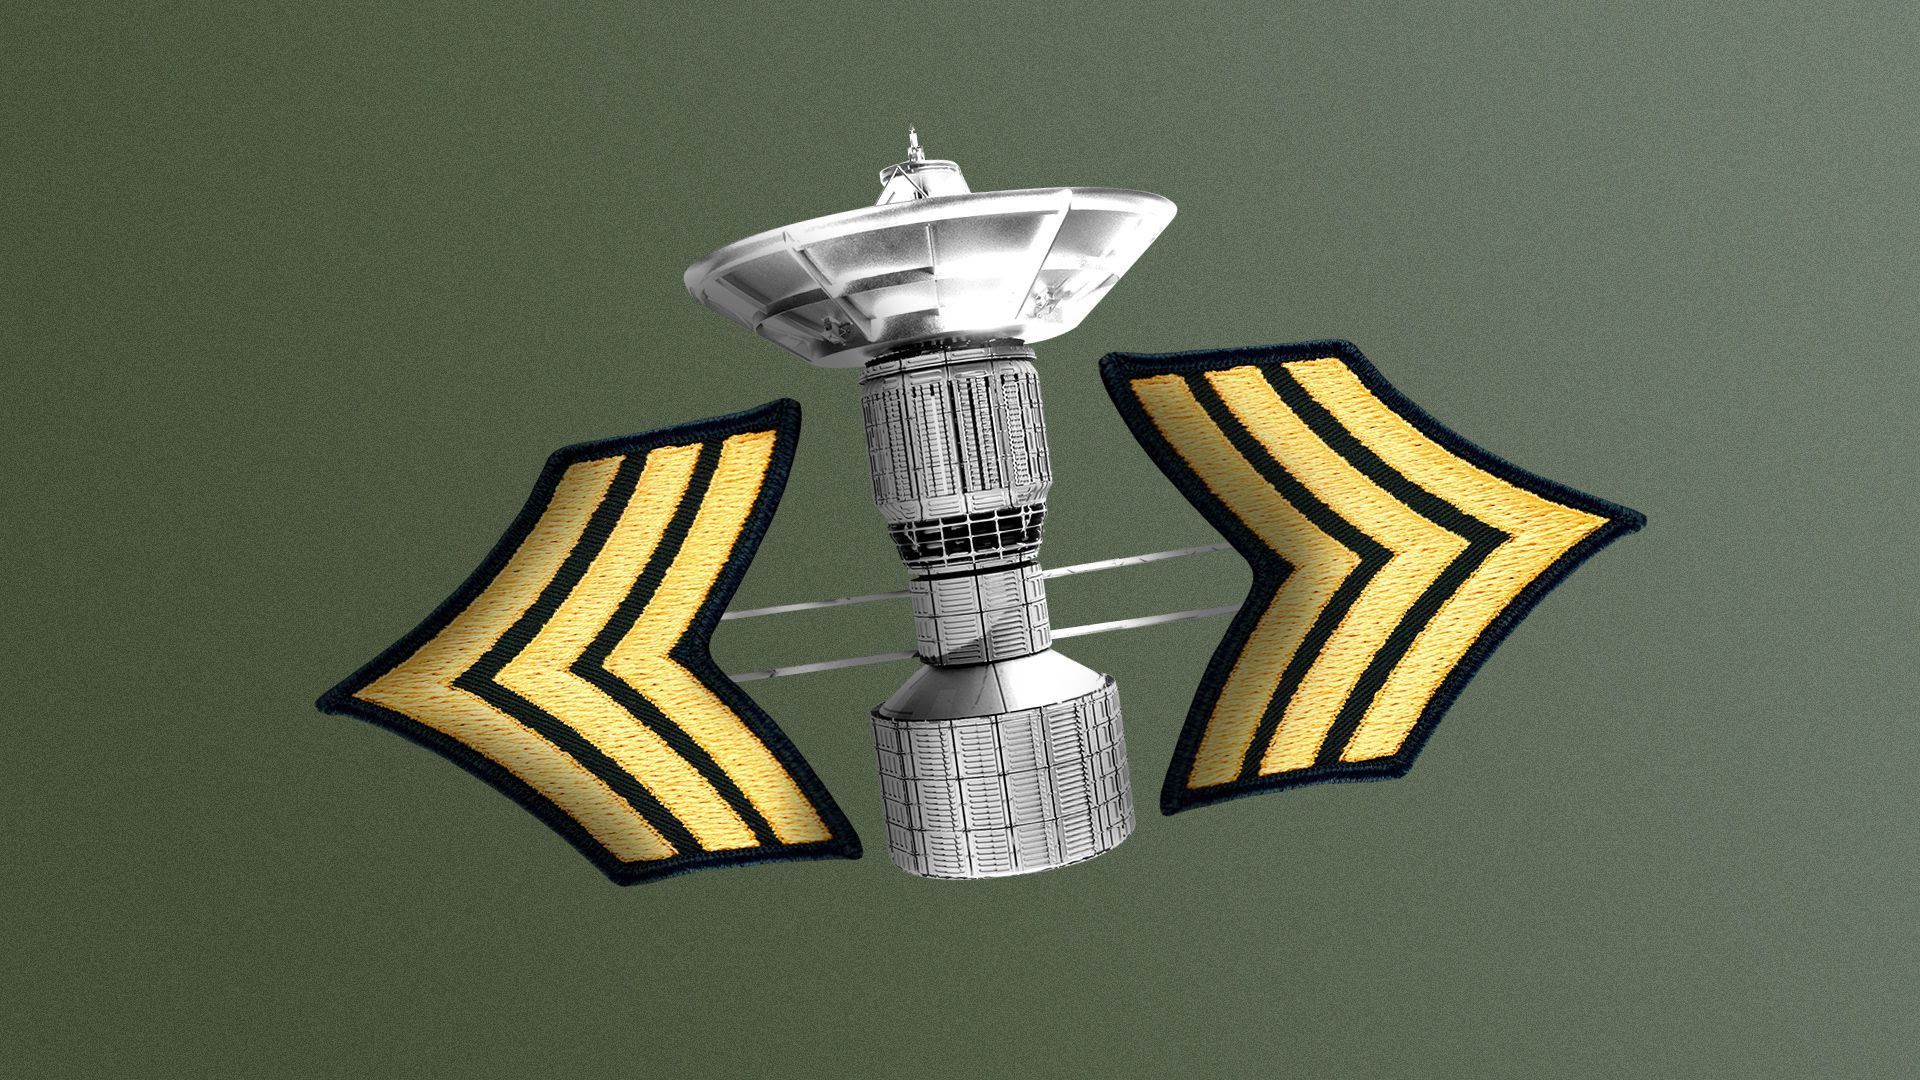 a satellite with military wings